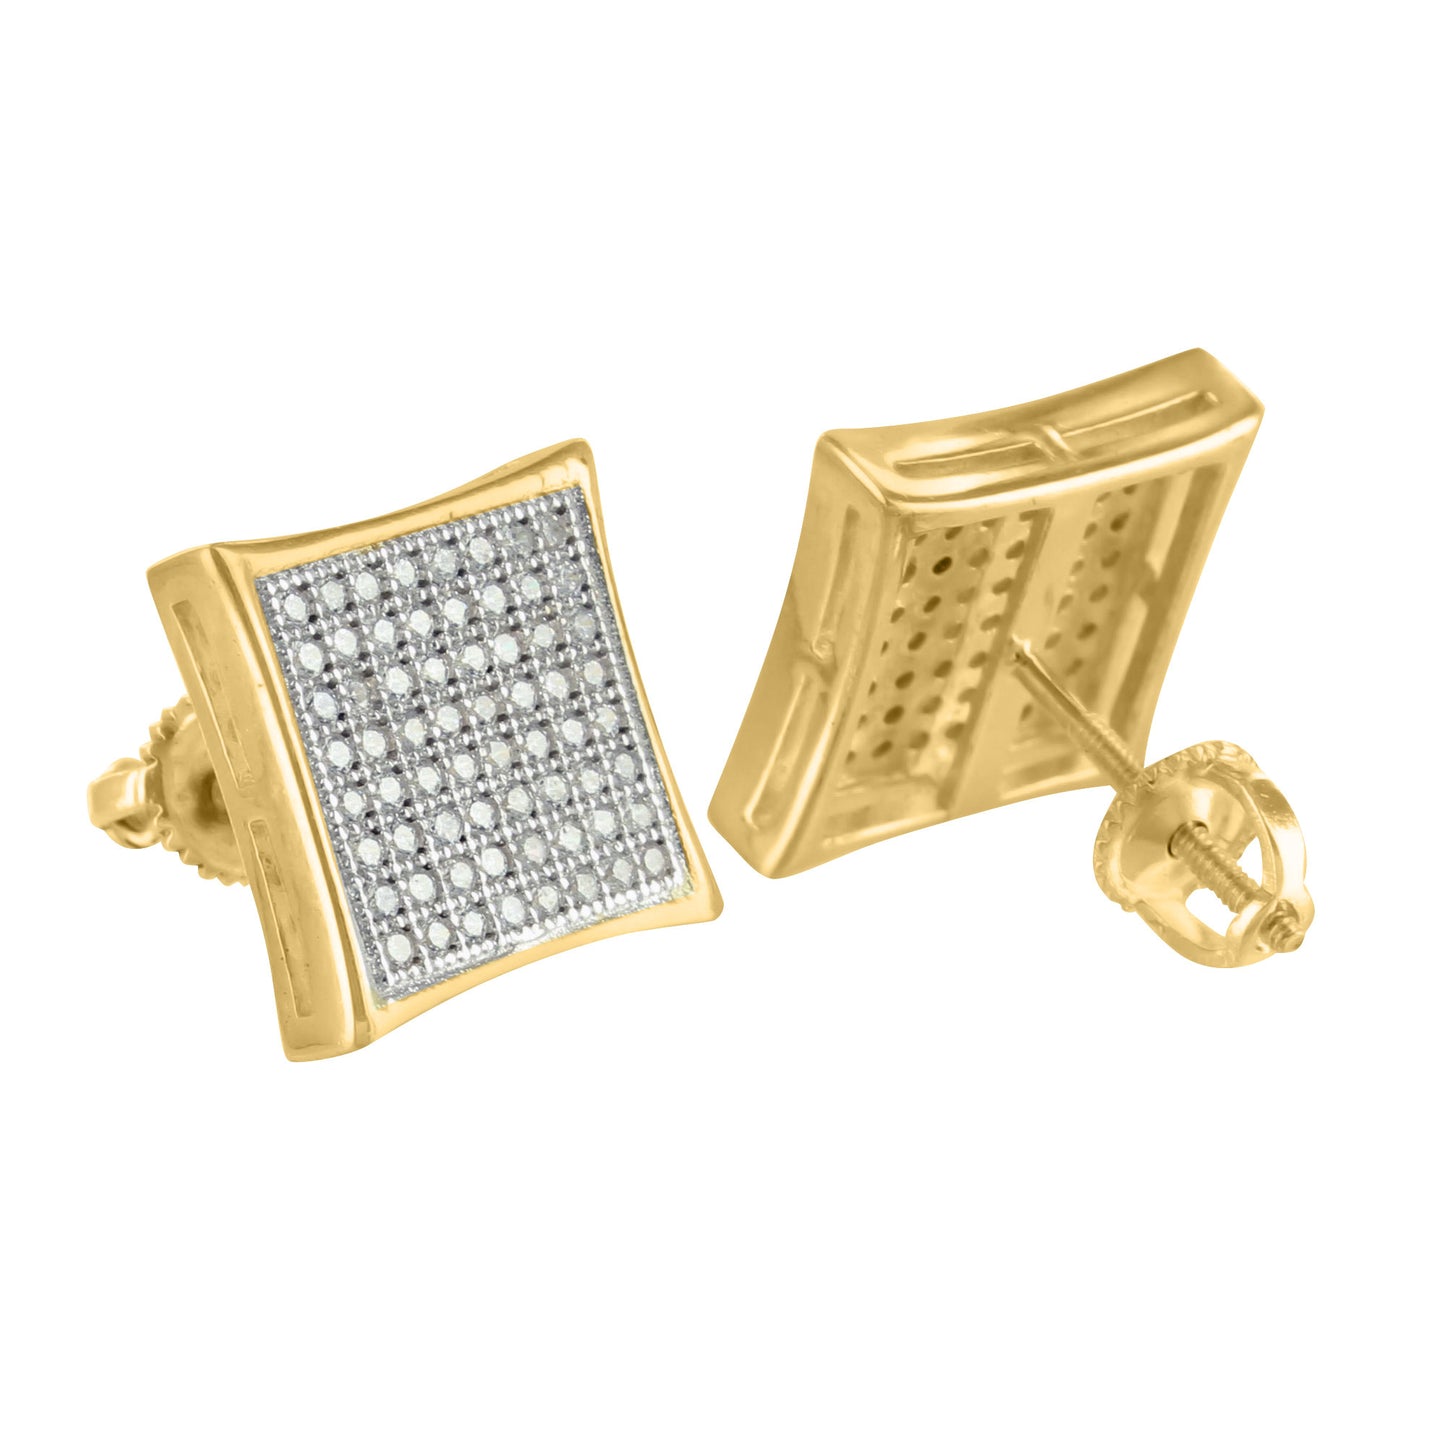 14k Gold Tone Earrings Kite Style Micro Pave